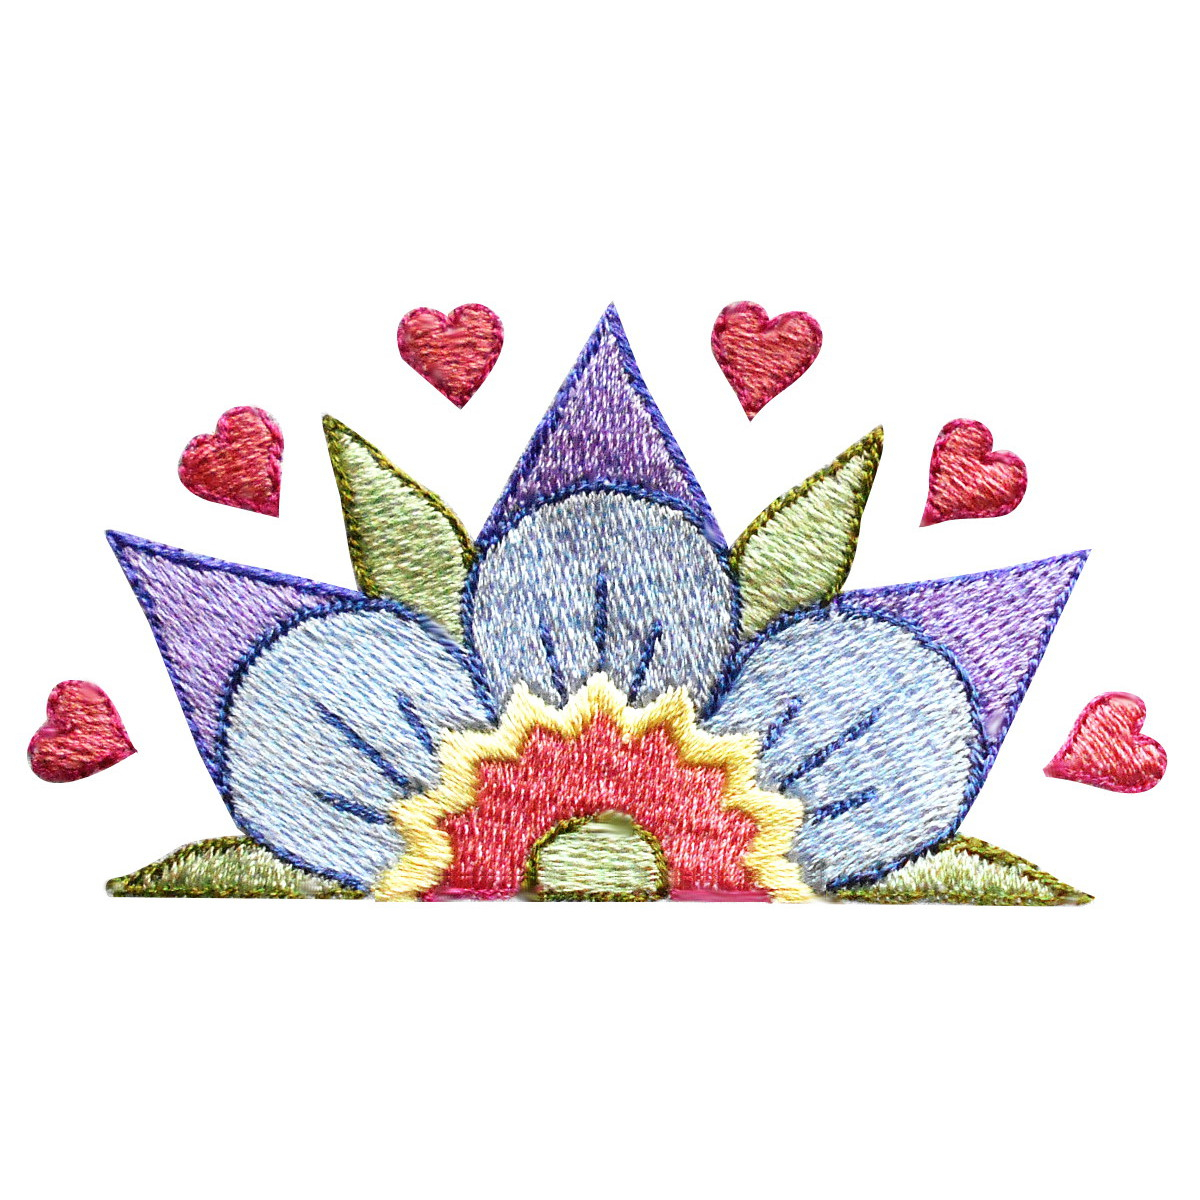 Norwegian Embroidery Patterns Floral Machine Embroidery Designs